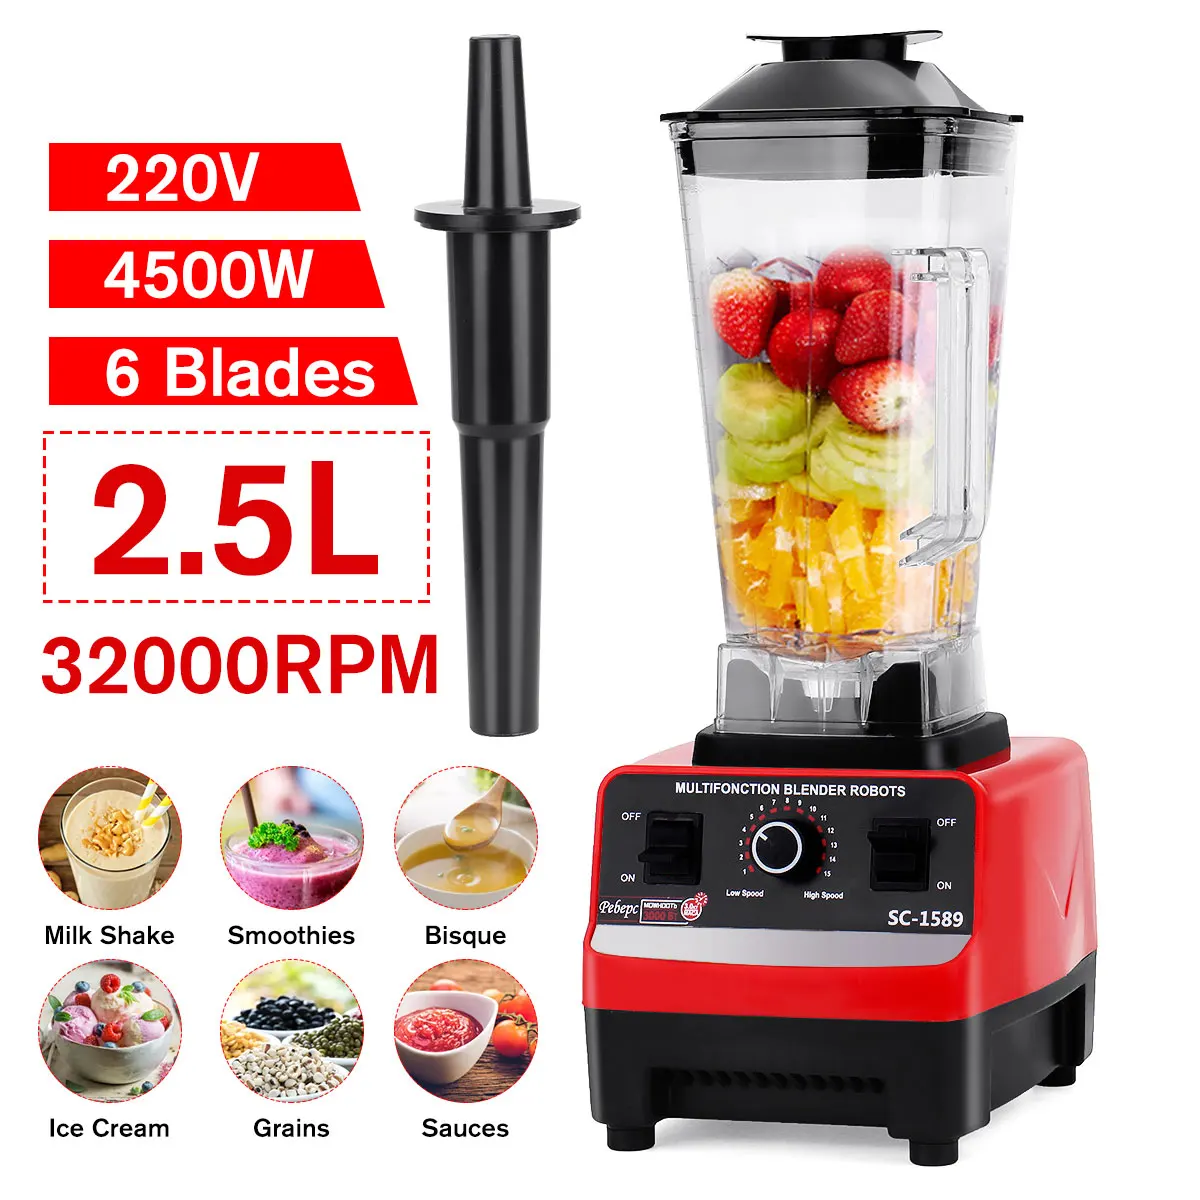 2.5L 4500W BPA Free Professional Heavy Duty Commercial Timer Blender Mixer Juicer Food Processor Ice Smoothies Crusher Kitchen